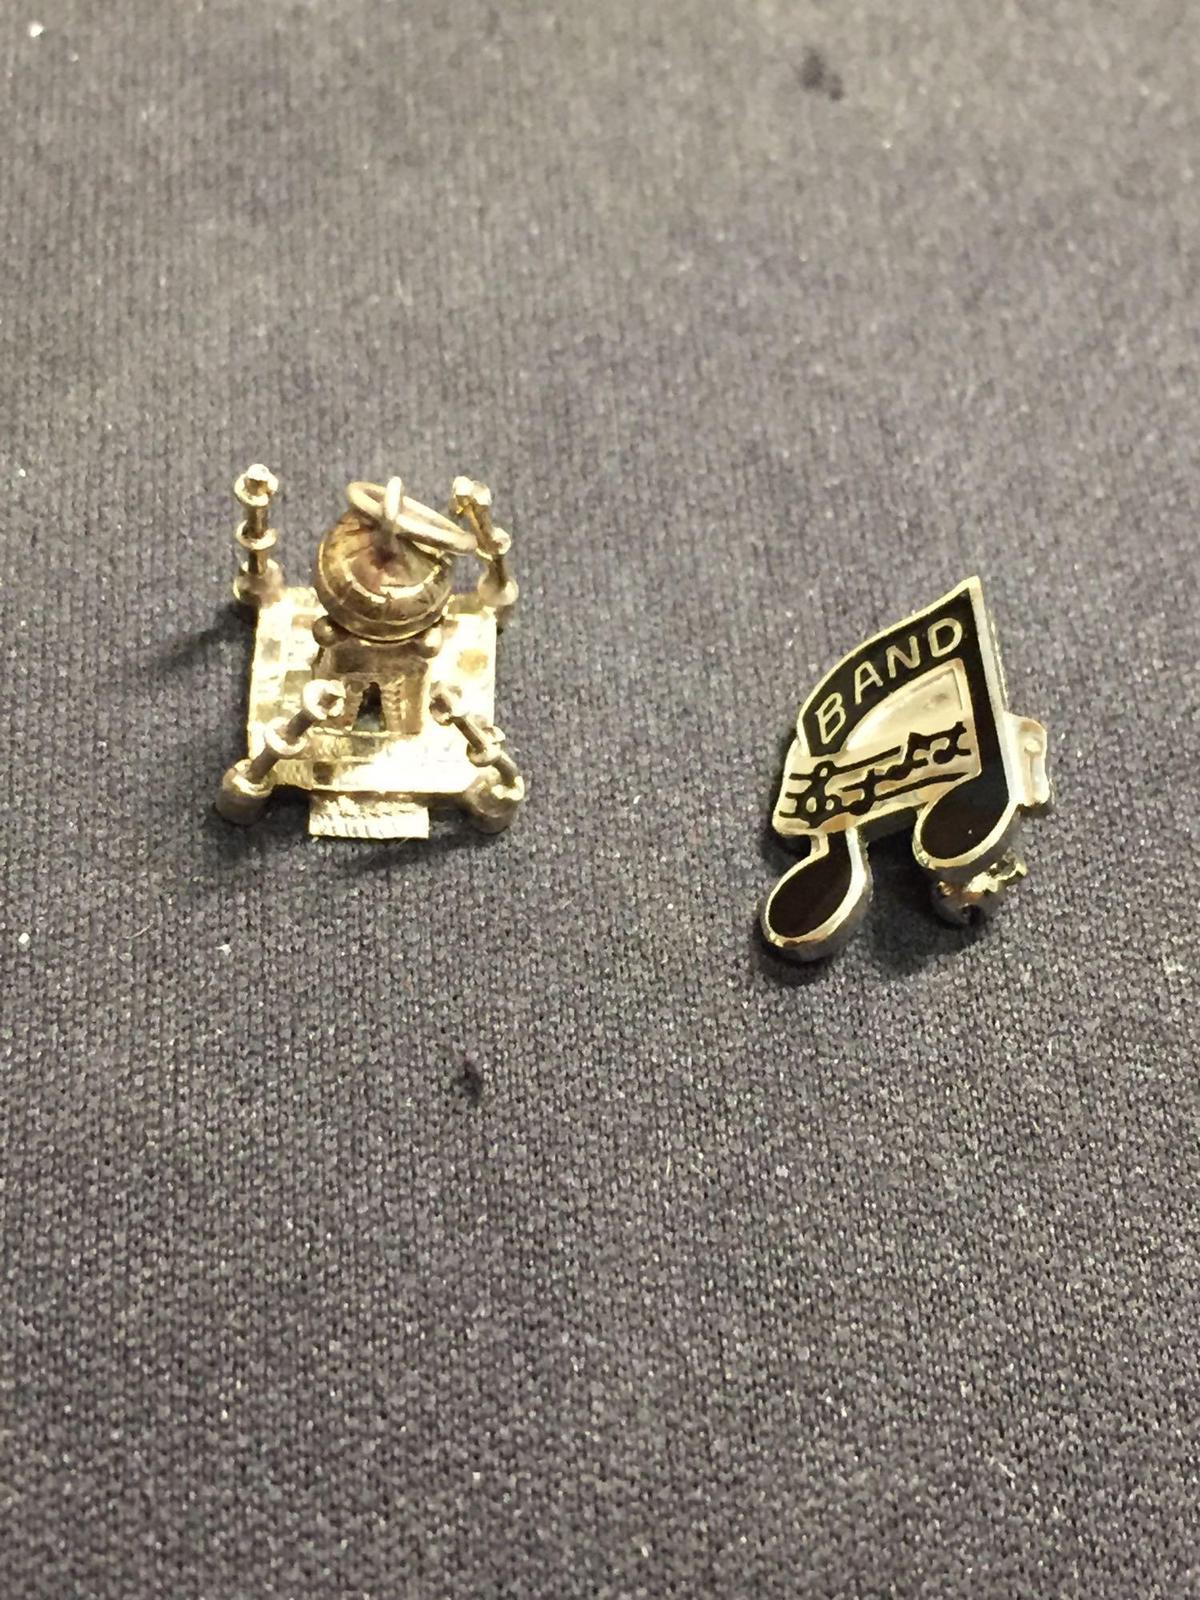 Lot of Two Sterling Silver Items, One Black Enameled Music Note Pin & Taj Mahal Themed Charm